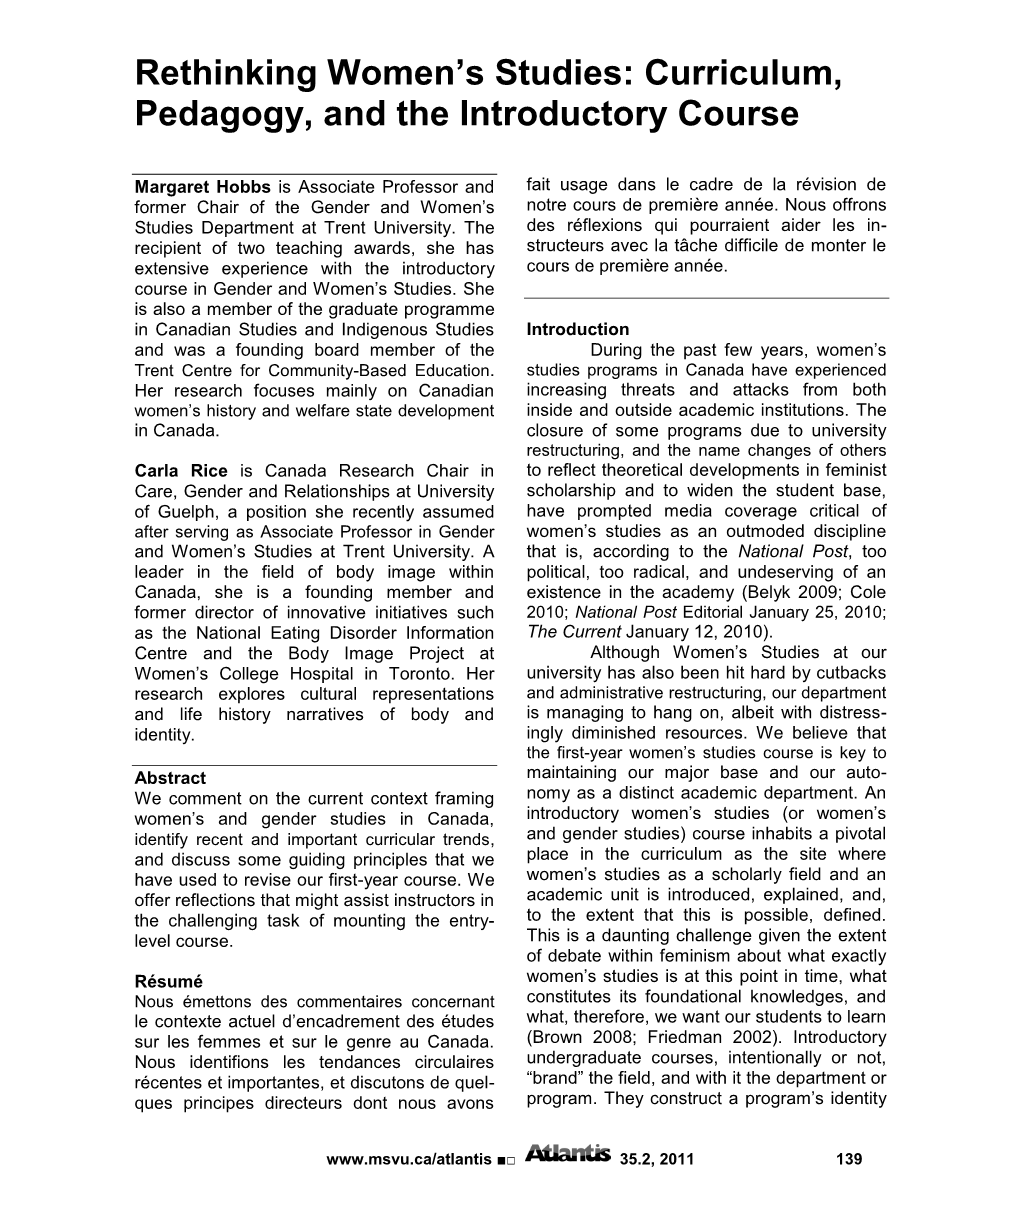 Curriculum, Pedagogy, and the Introductory Course